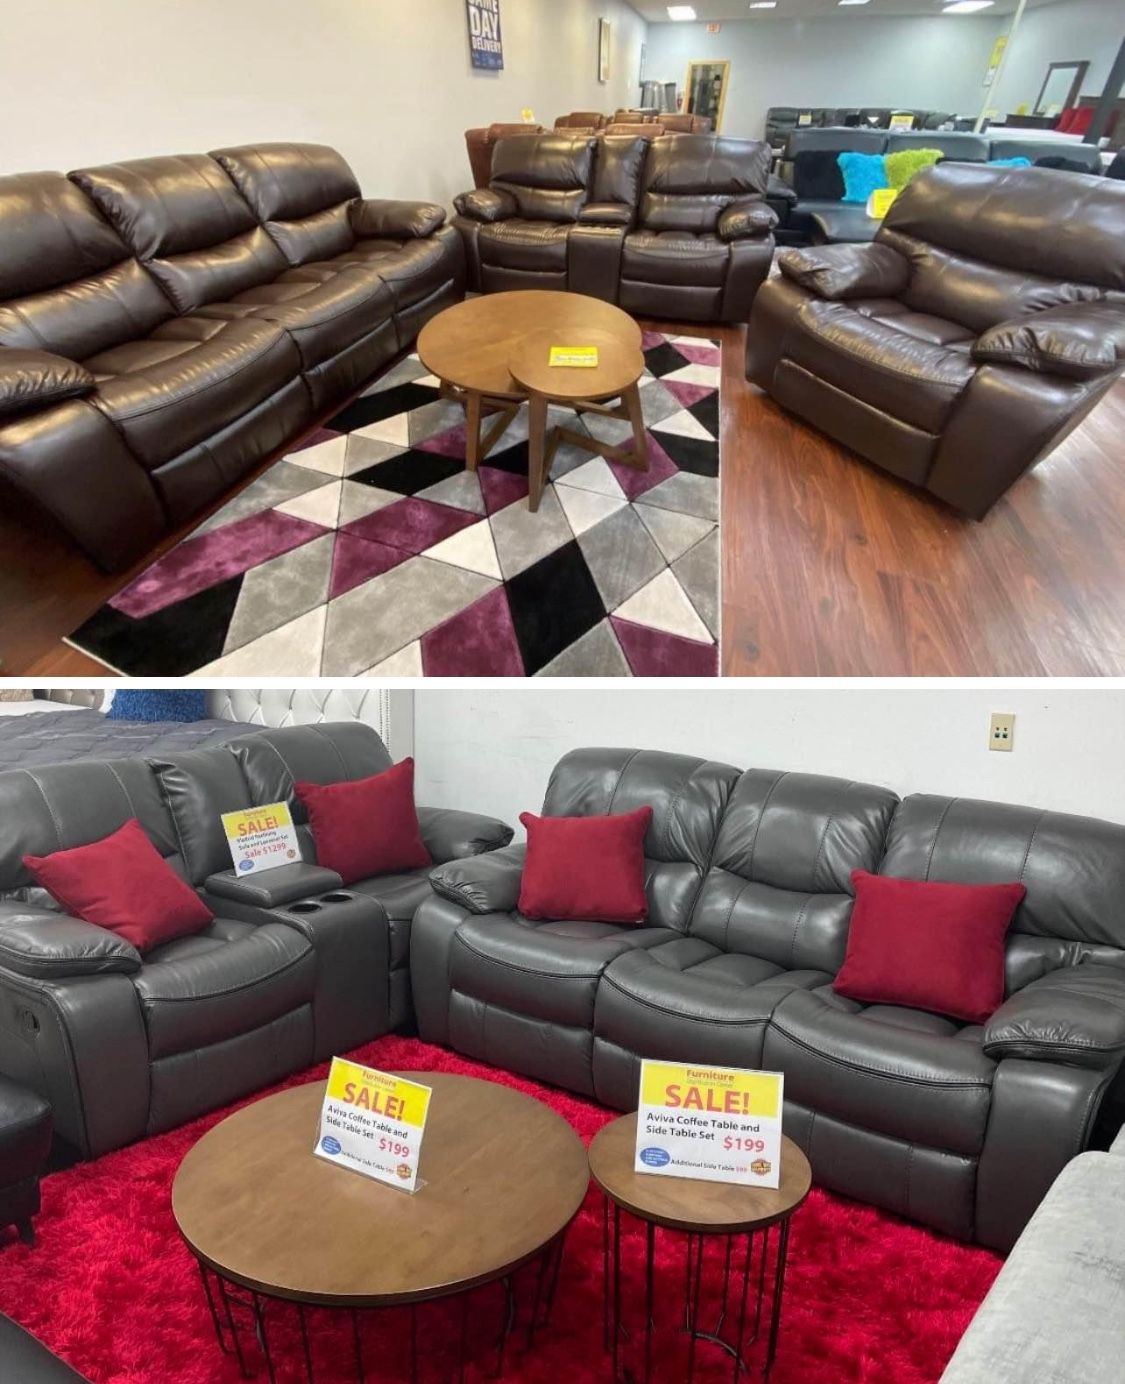 Spring Sale Event! Madrid, Leather Reclining Sofa And Loveseat Only $899. Easy Finance Option. Same Day Delivery.